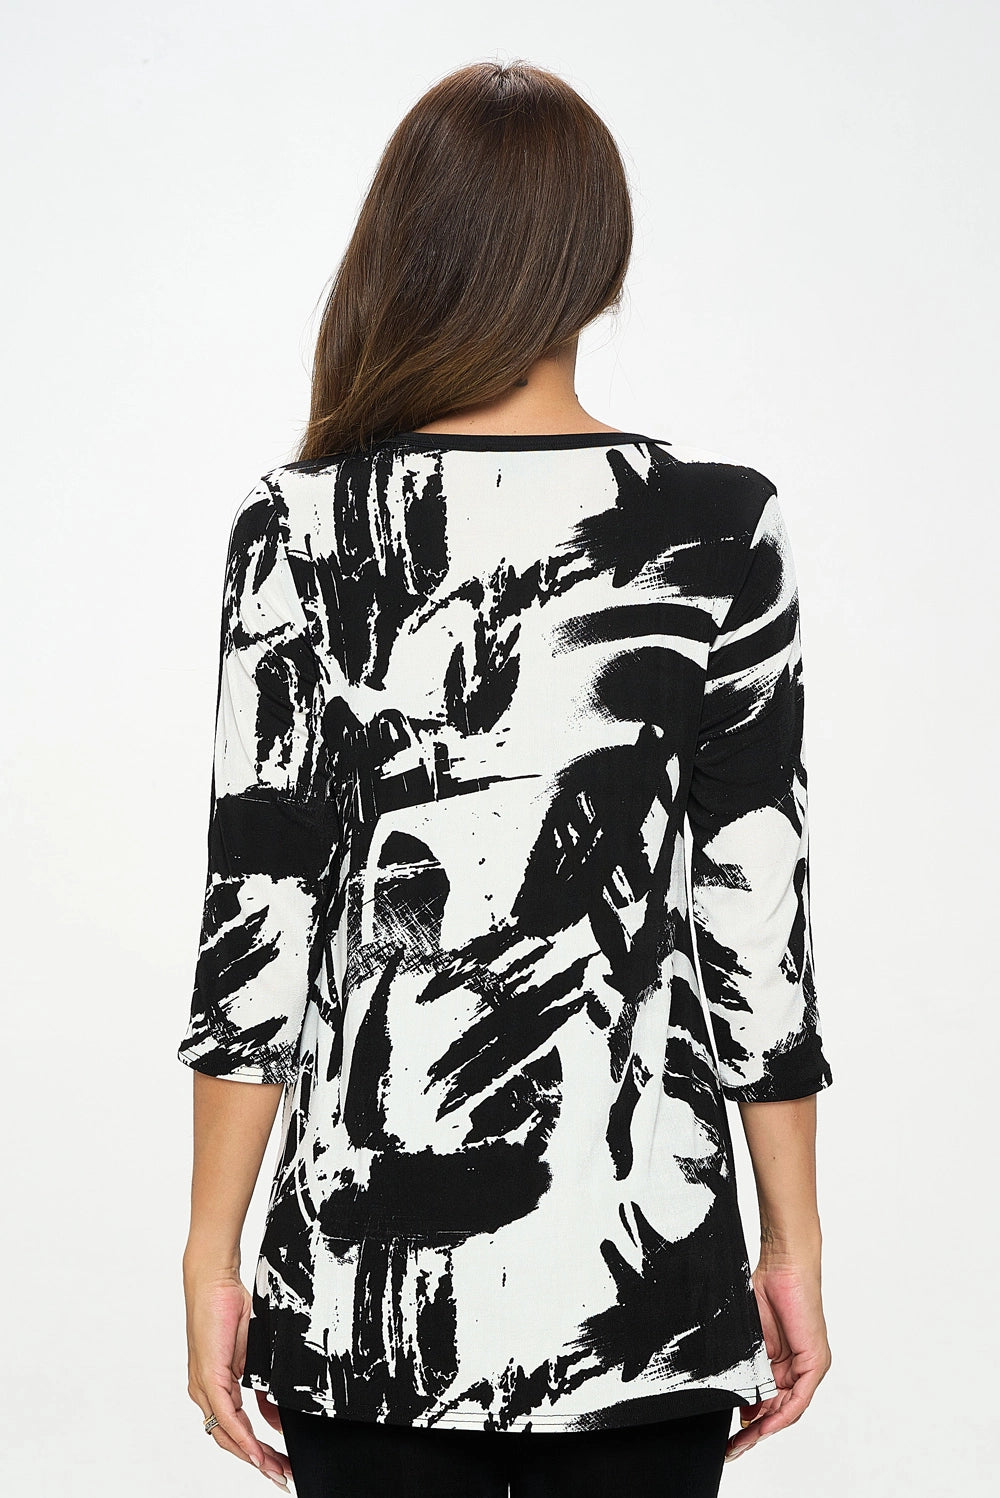 Graffiti V-Neck Contrast Voyage Collection Top